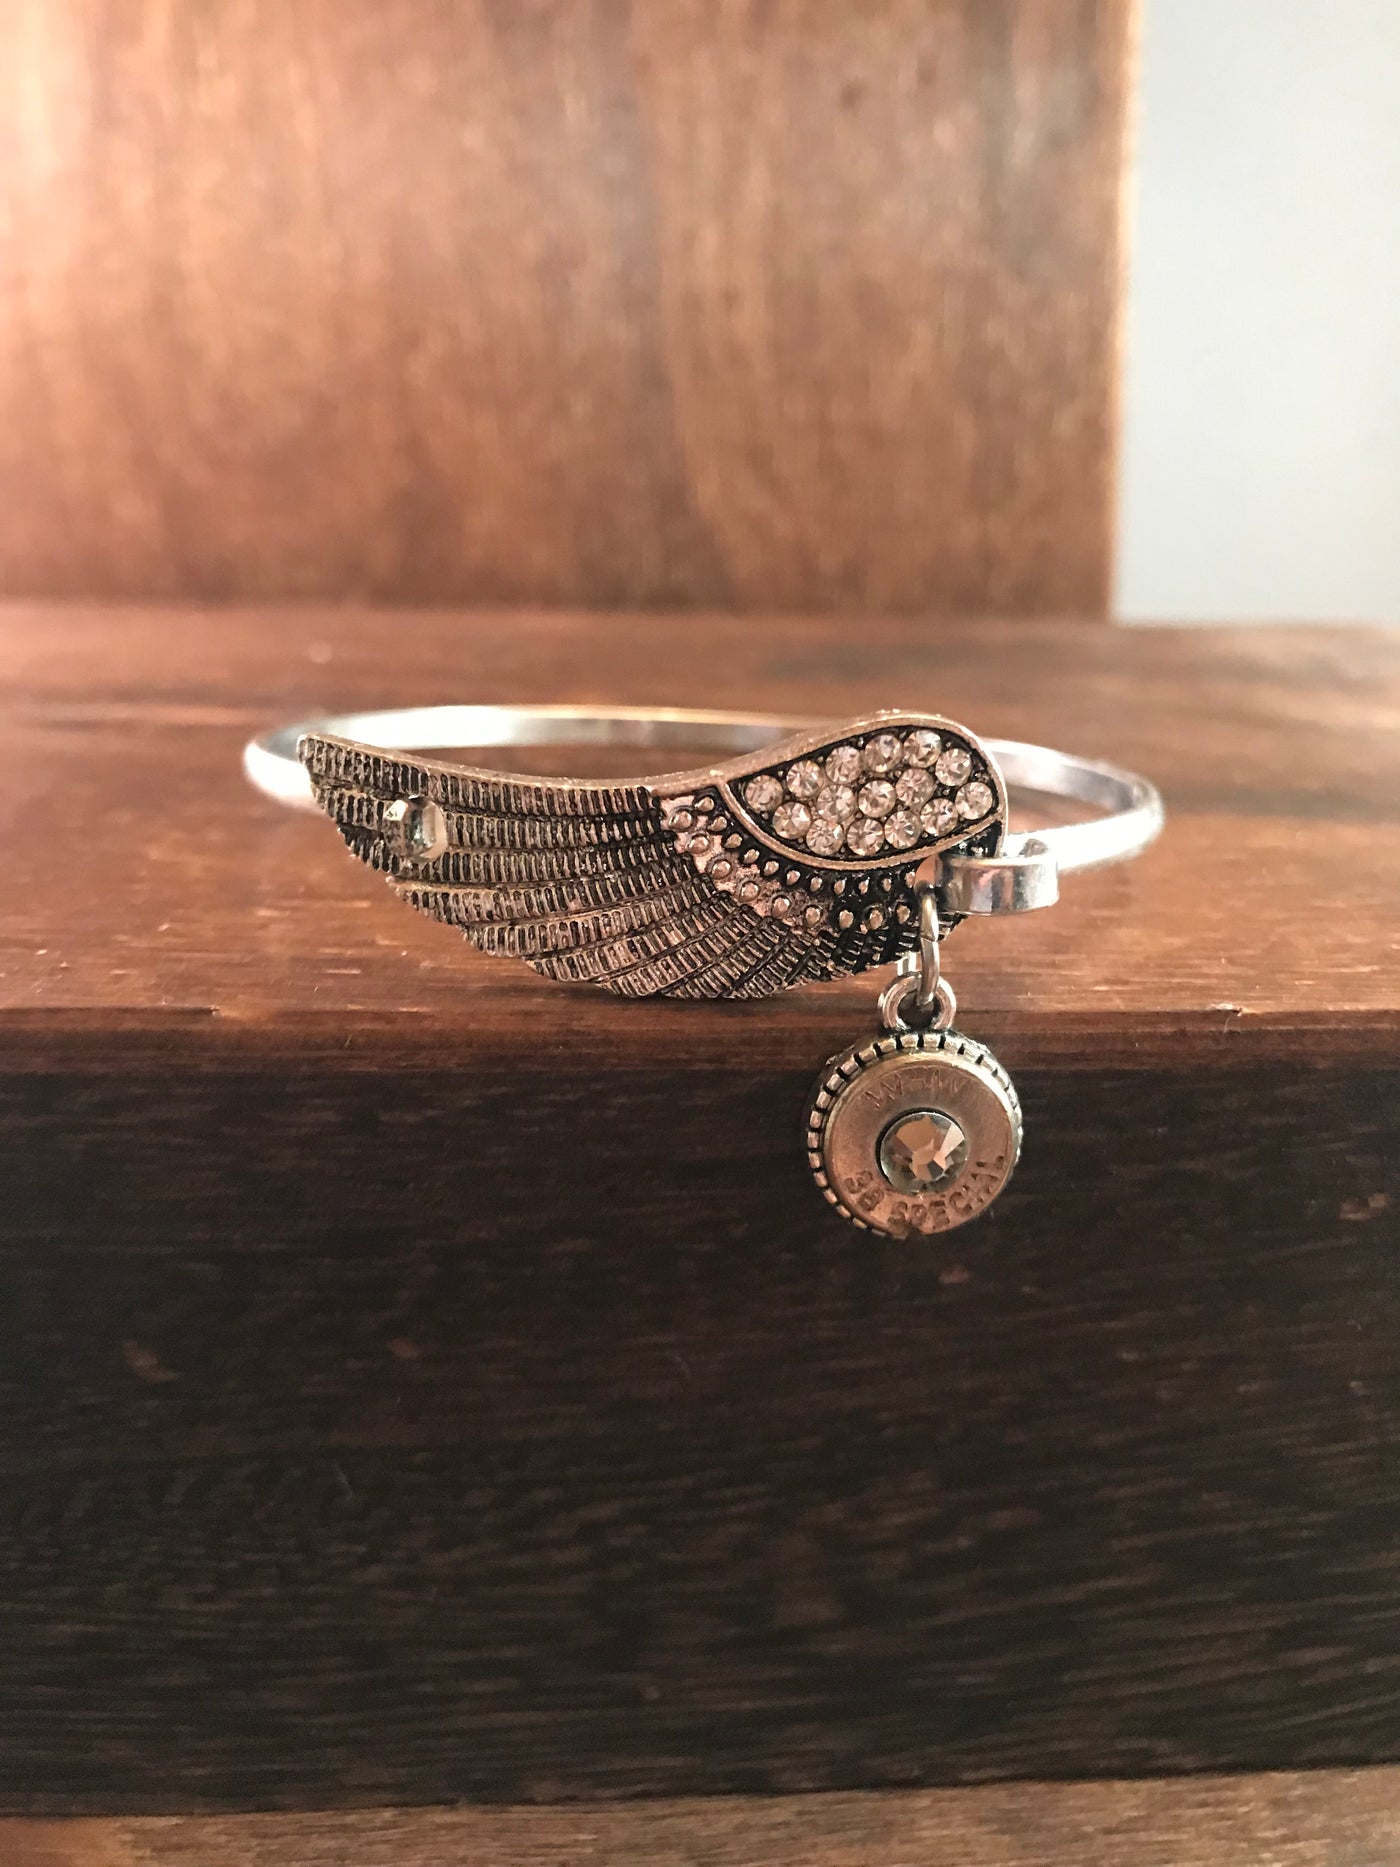 Antique silver feather bracelet - Jill's Jewels | Unique, Handcrafted, Trendy, And Fun Jewelry